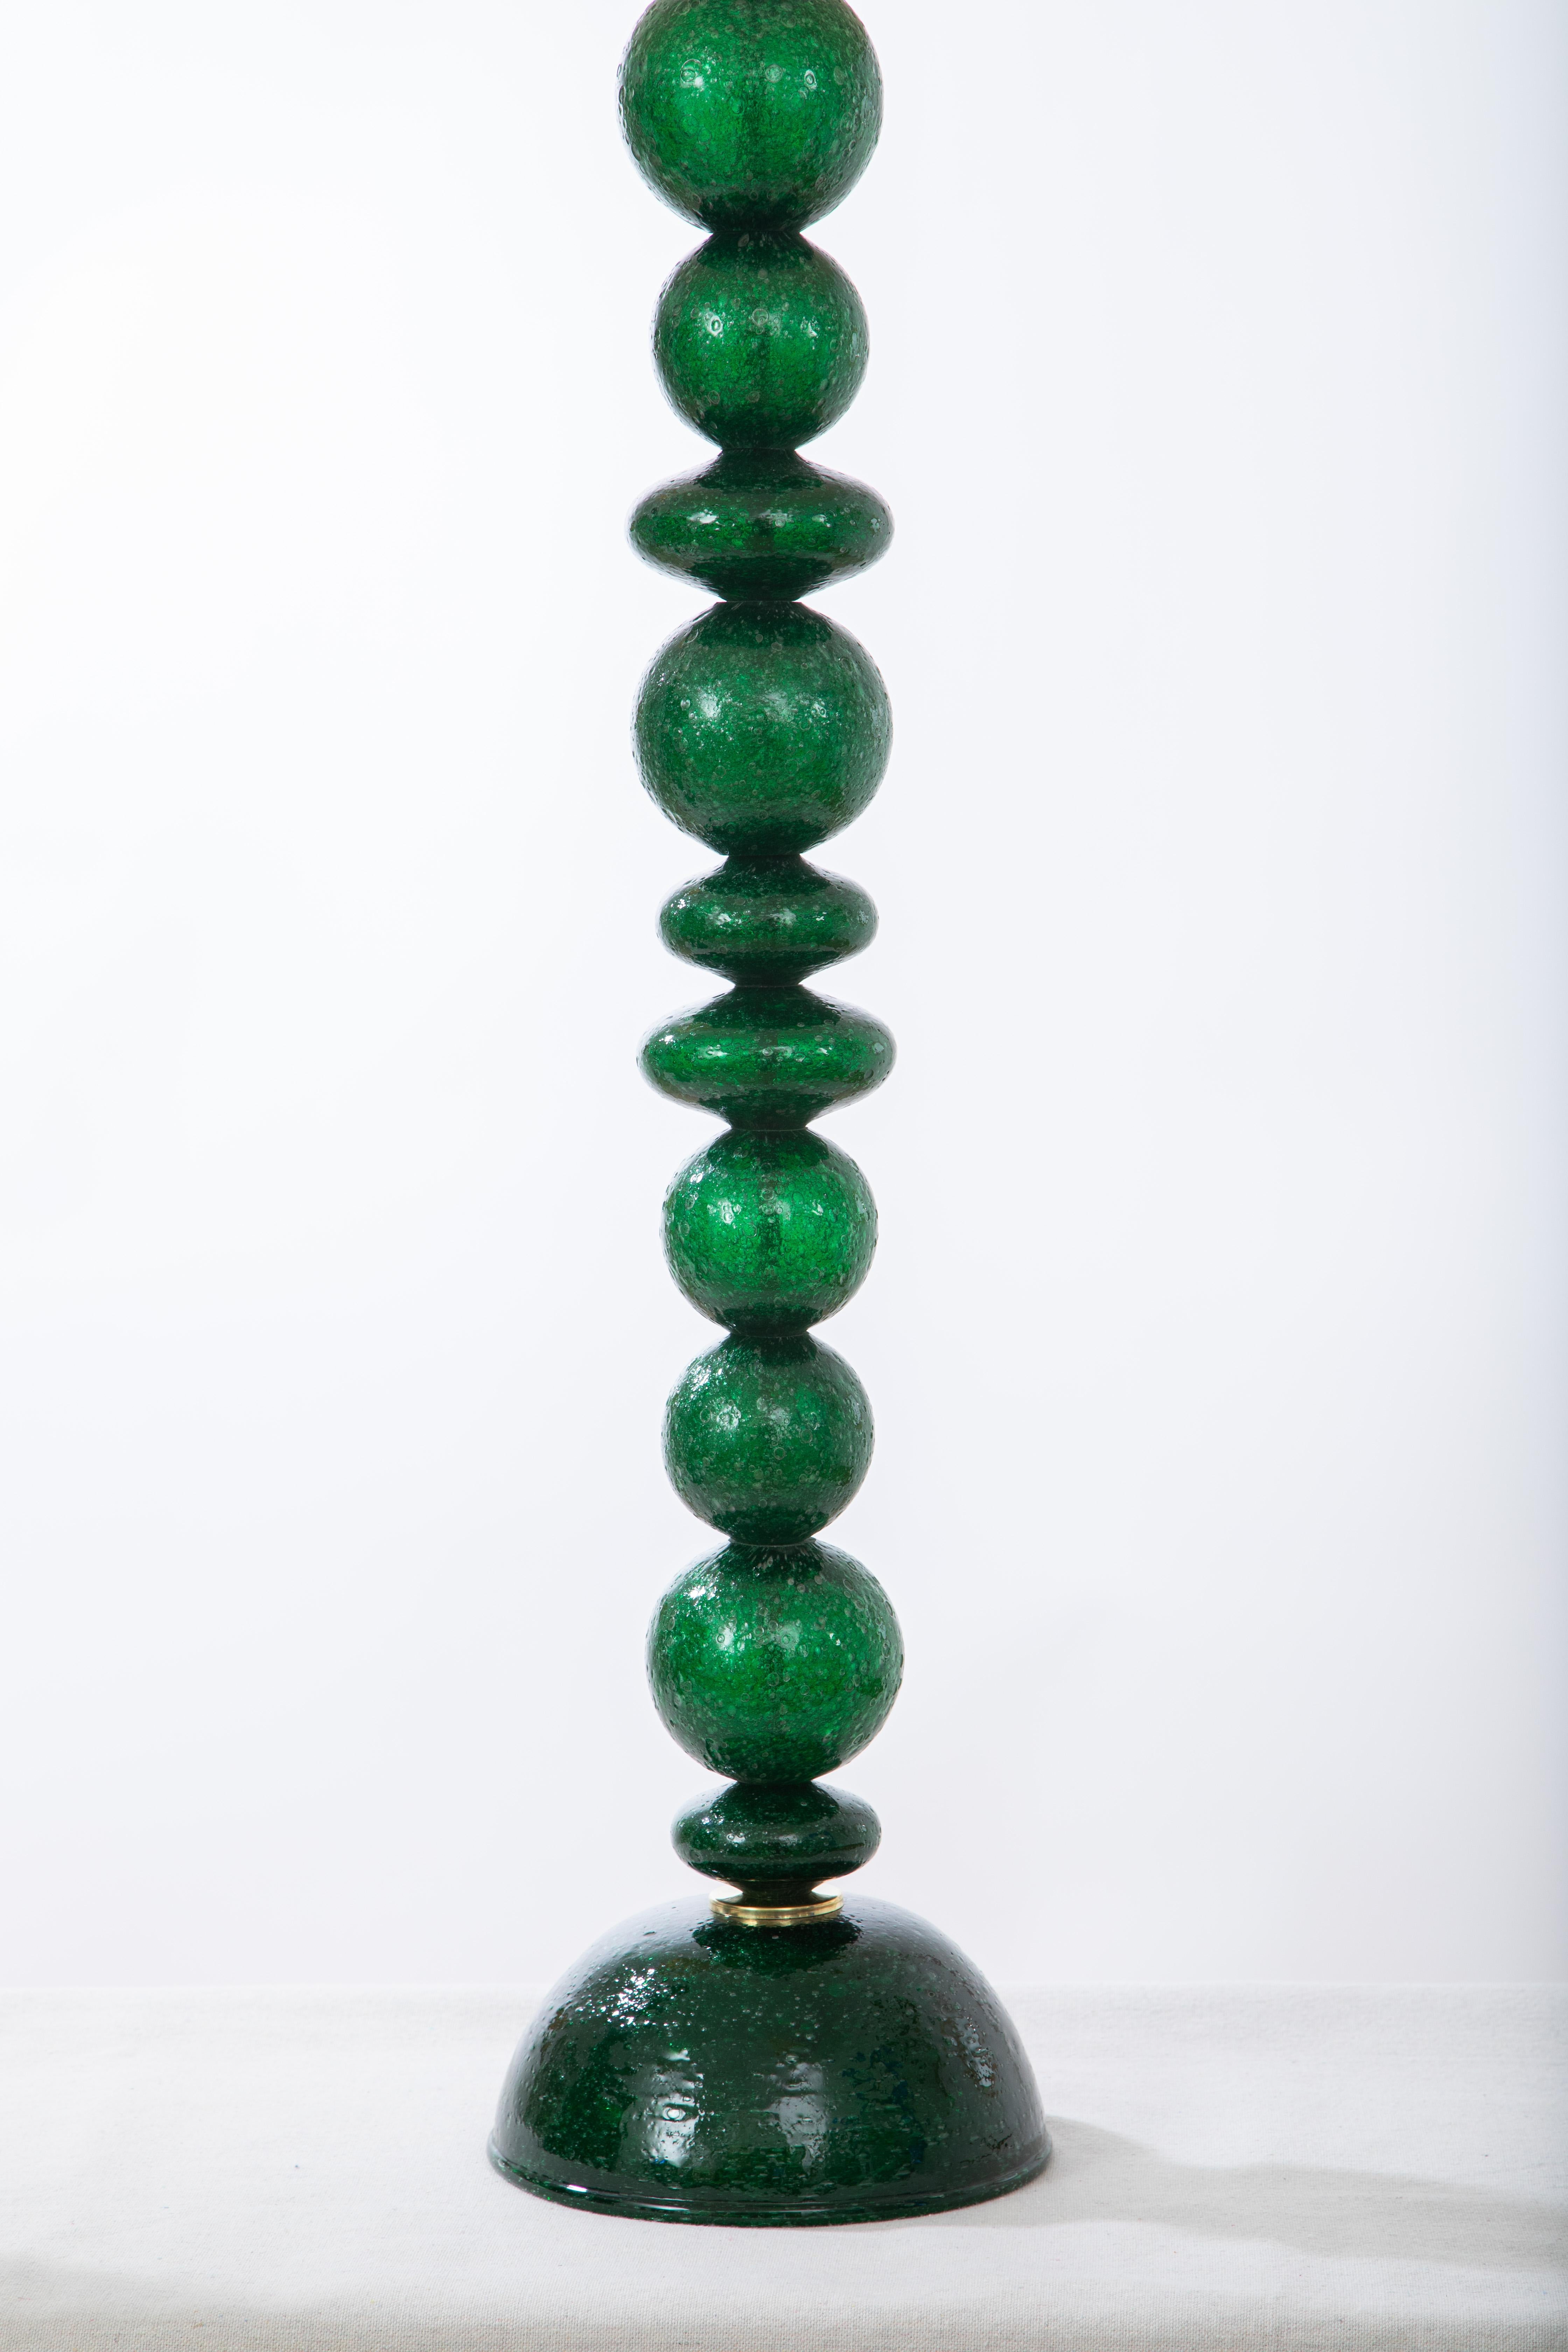 Pair of tall green Pulegoso Murano glass table lamps, in stock
One of kind Murano table lamp with 11-stacked different ball shape globes
Studio built using vintage parts
Newly wired for US standard
 Beautiful dark green color and texture
This